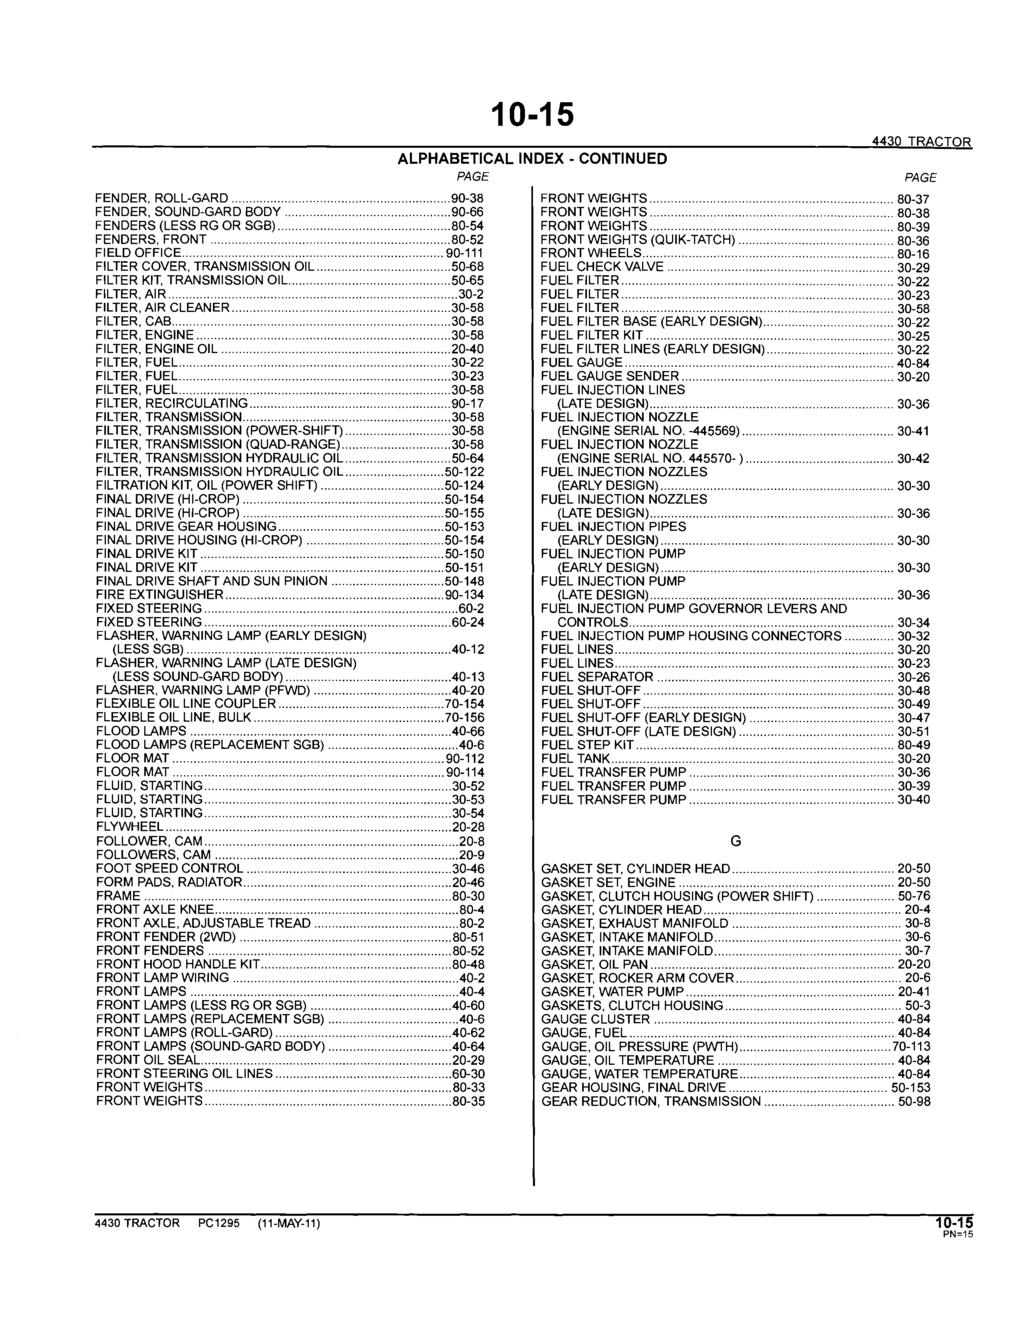 10-15 ALPHABETICAL INDEX - CONTINUED PAGE 4430 TRACTOR FENDER, ROLL-GARD... 90-38 FRONT WEIGHTS... 80-37 FENDER, SOUND-GARD BODY... 90-66 FRONT WEIGHTS... 80-38 FENDERS (LESS RG OR SGB).